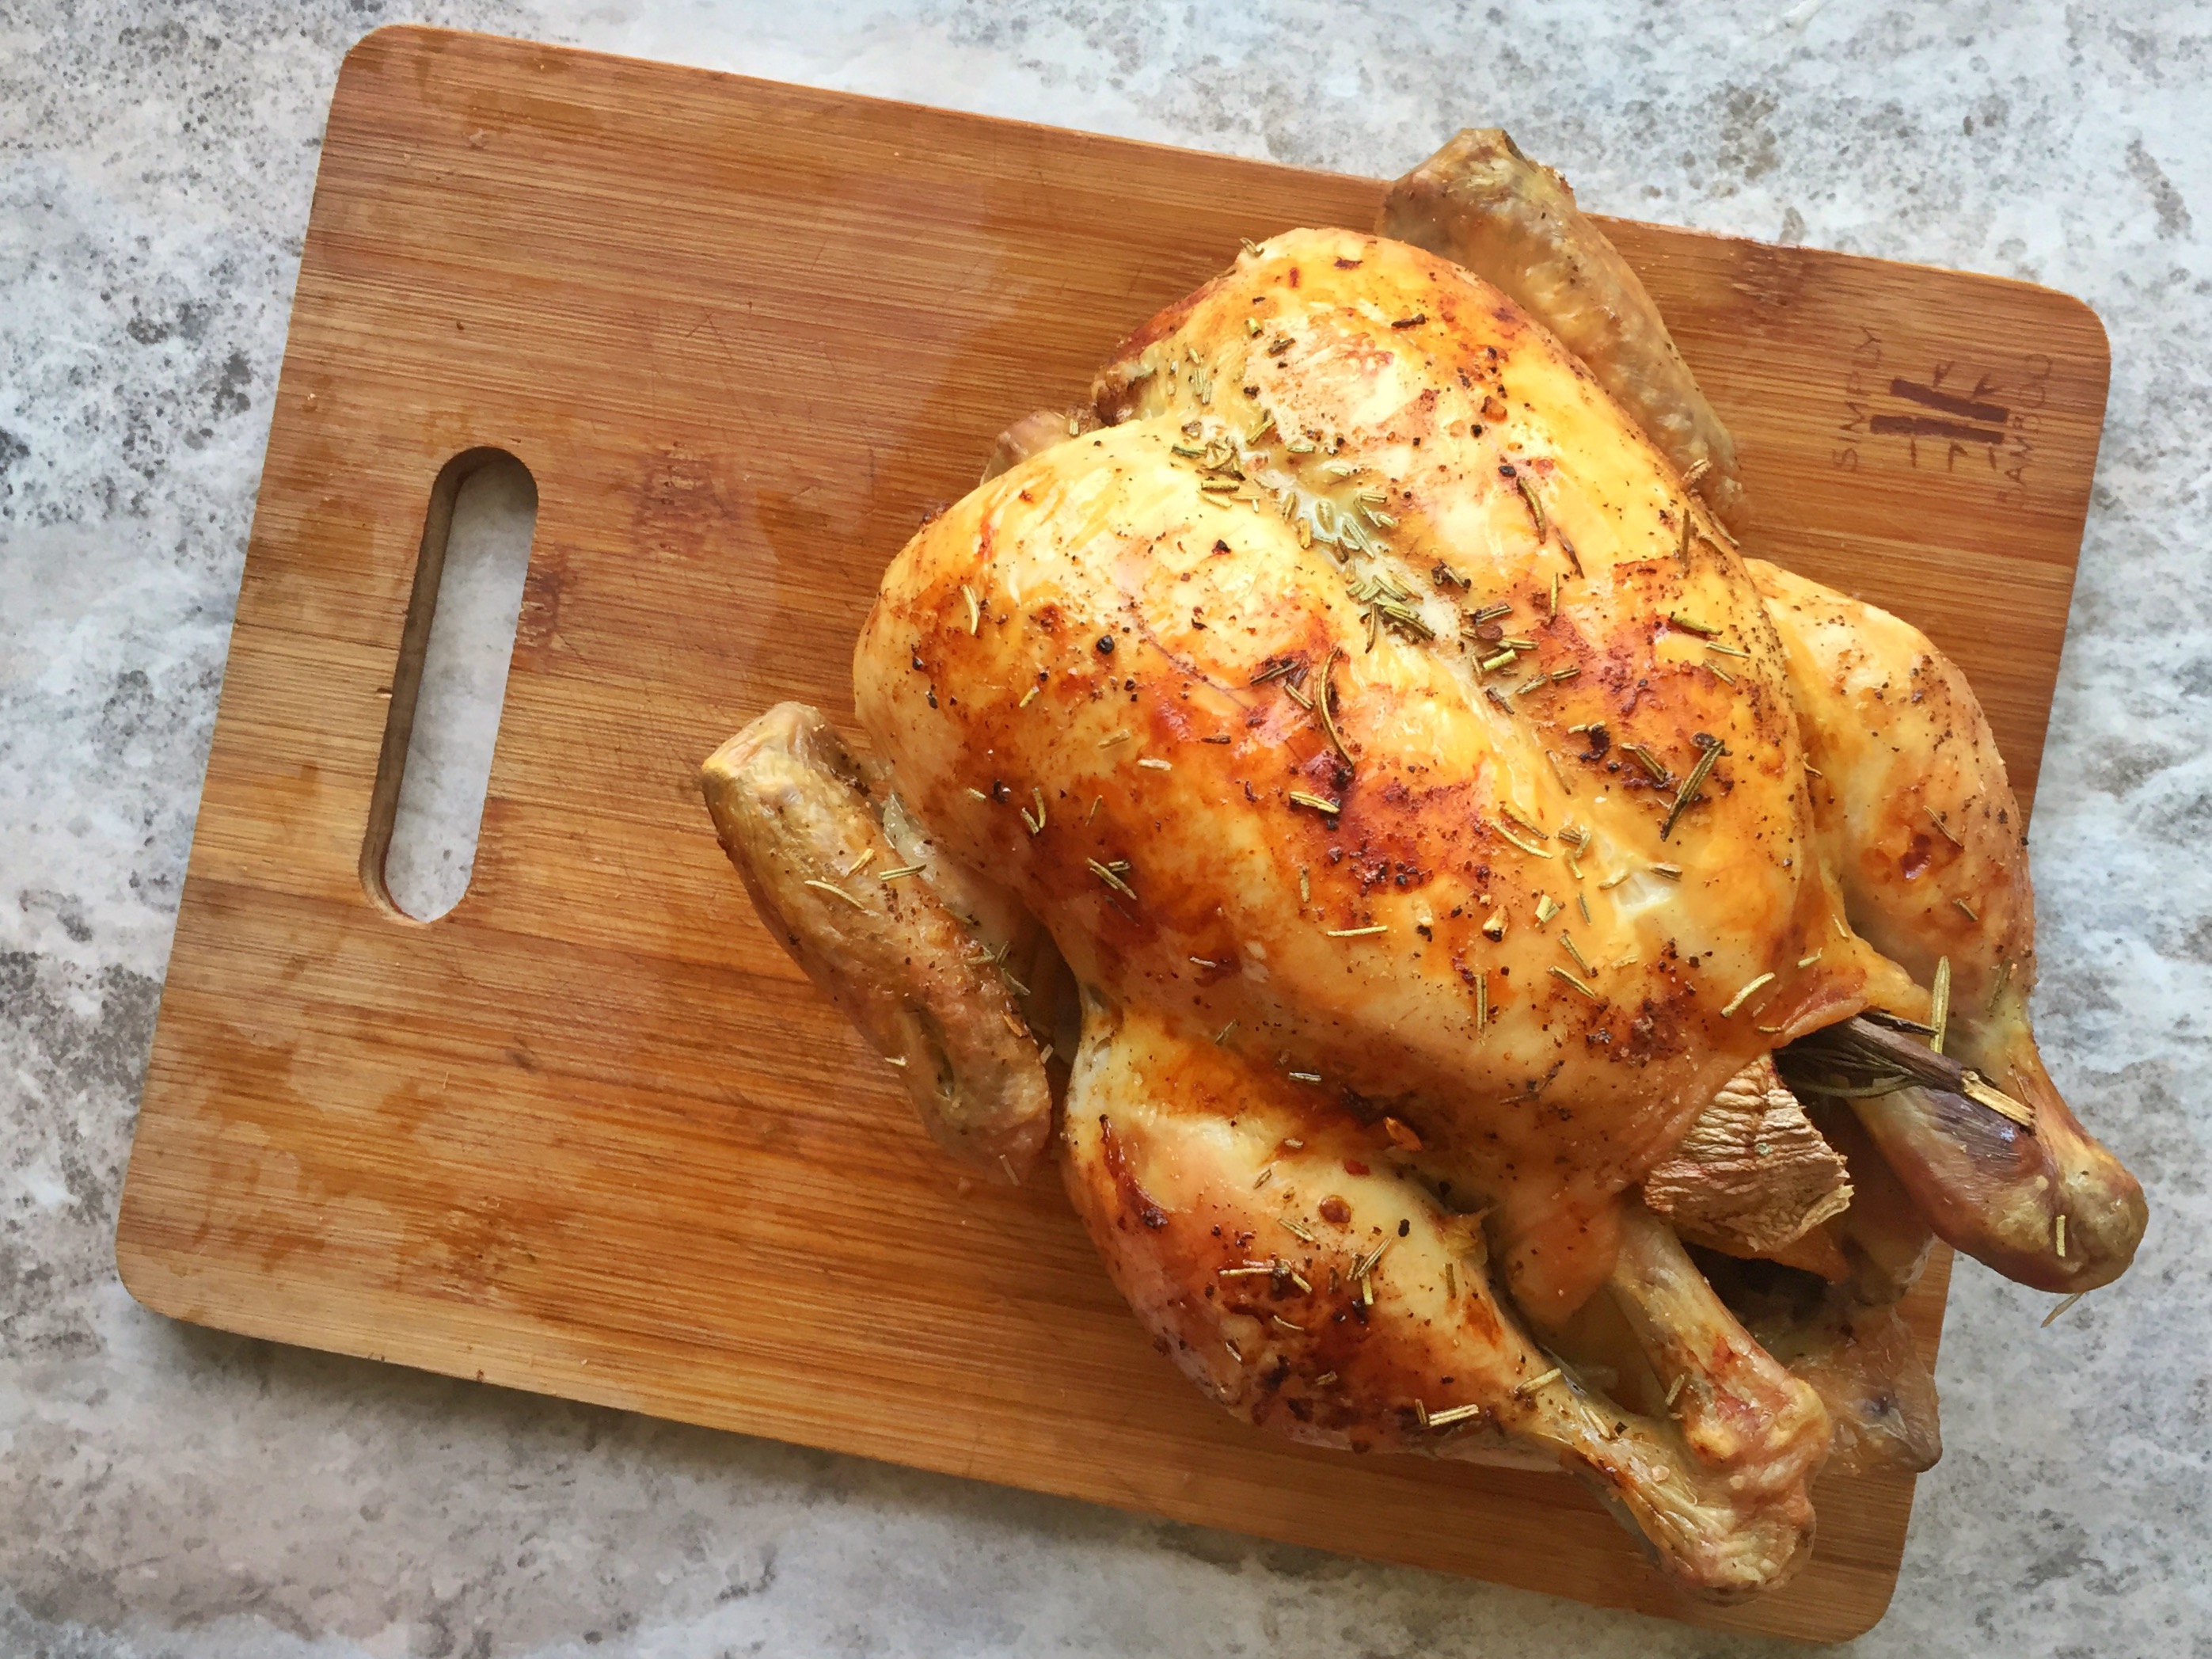 Lemon rosemary roasted chicken with rustic ratatouille